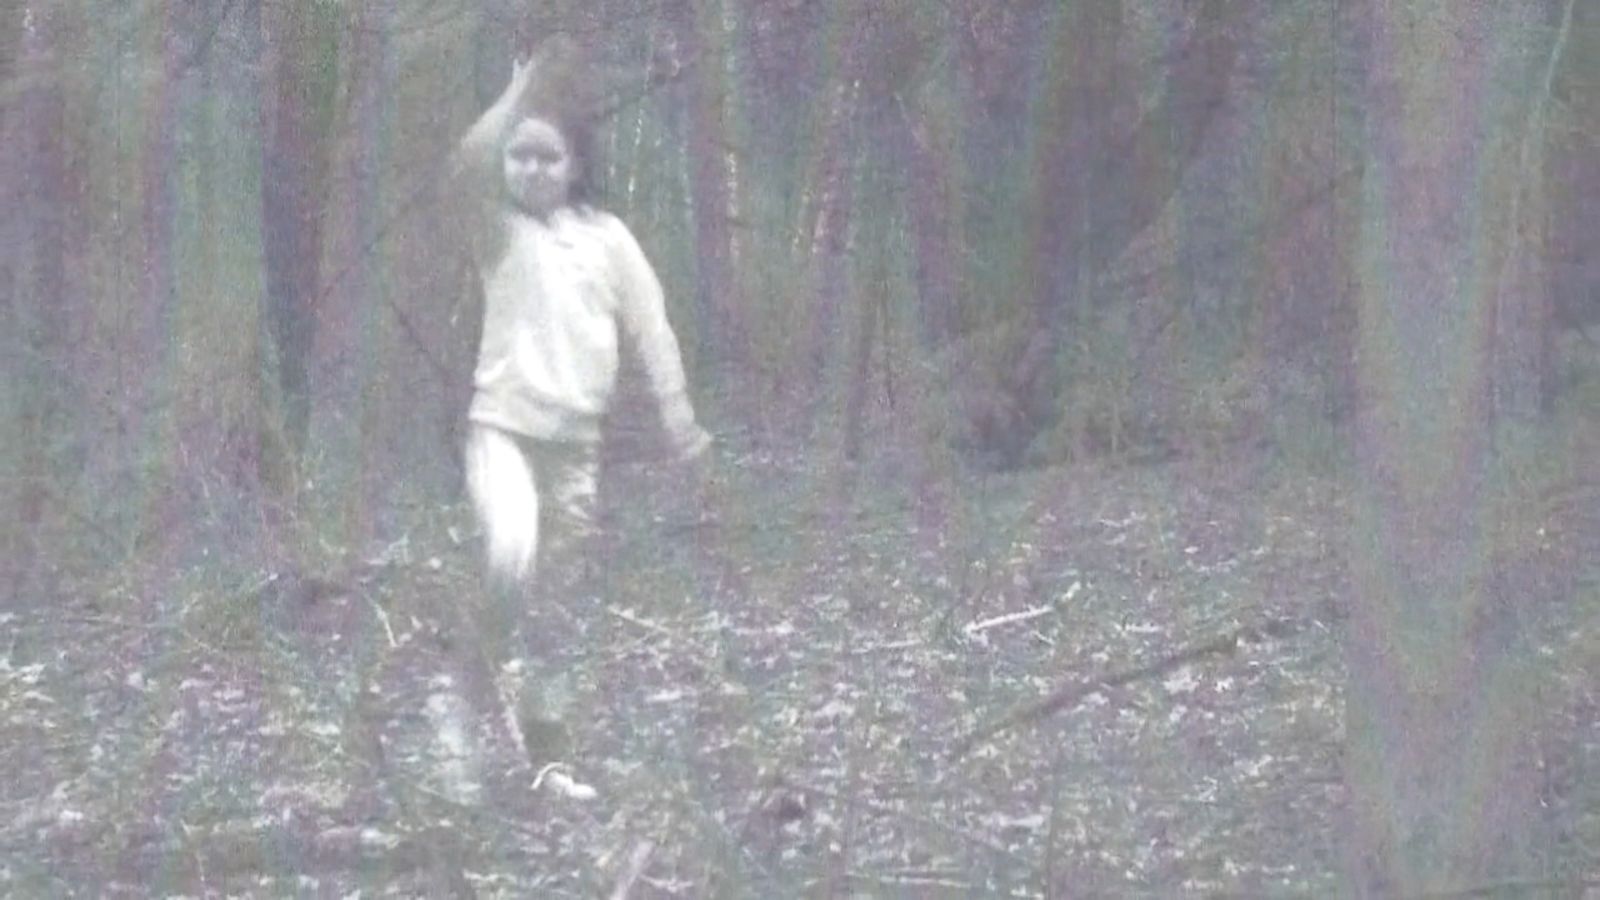 Spirited debate over ghost or girl mystery ends in NY town